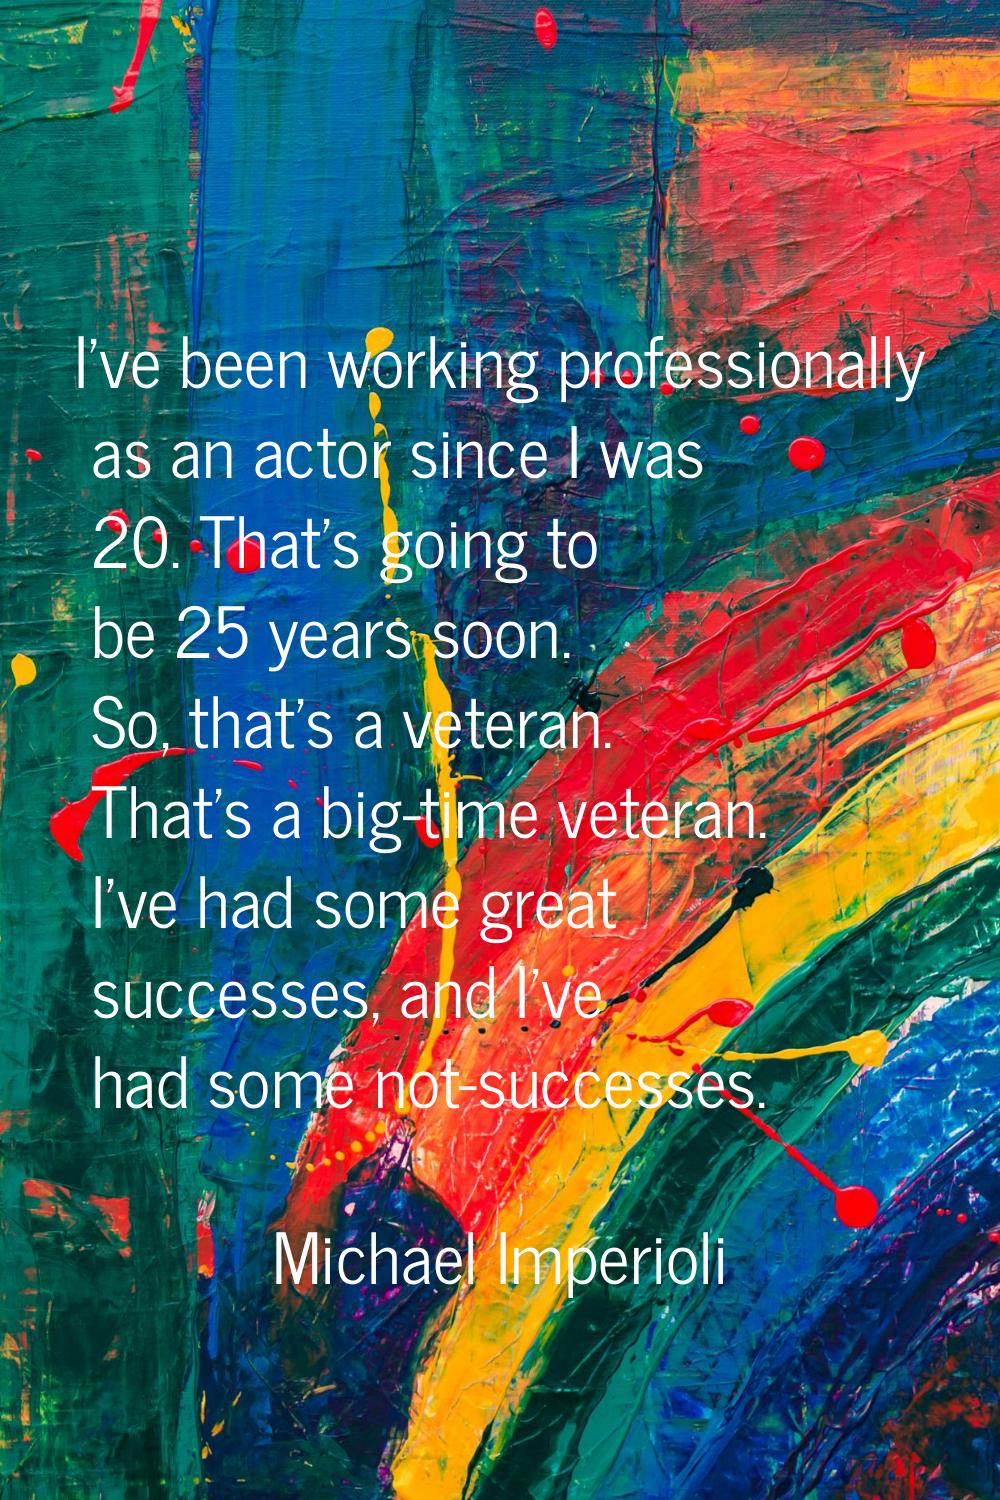 I've been working professionally as an actor since I was 20. That's going to be 25 years soon. So, 